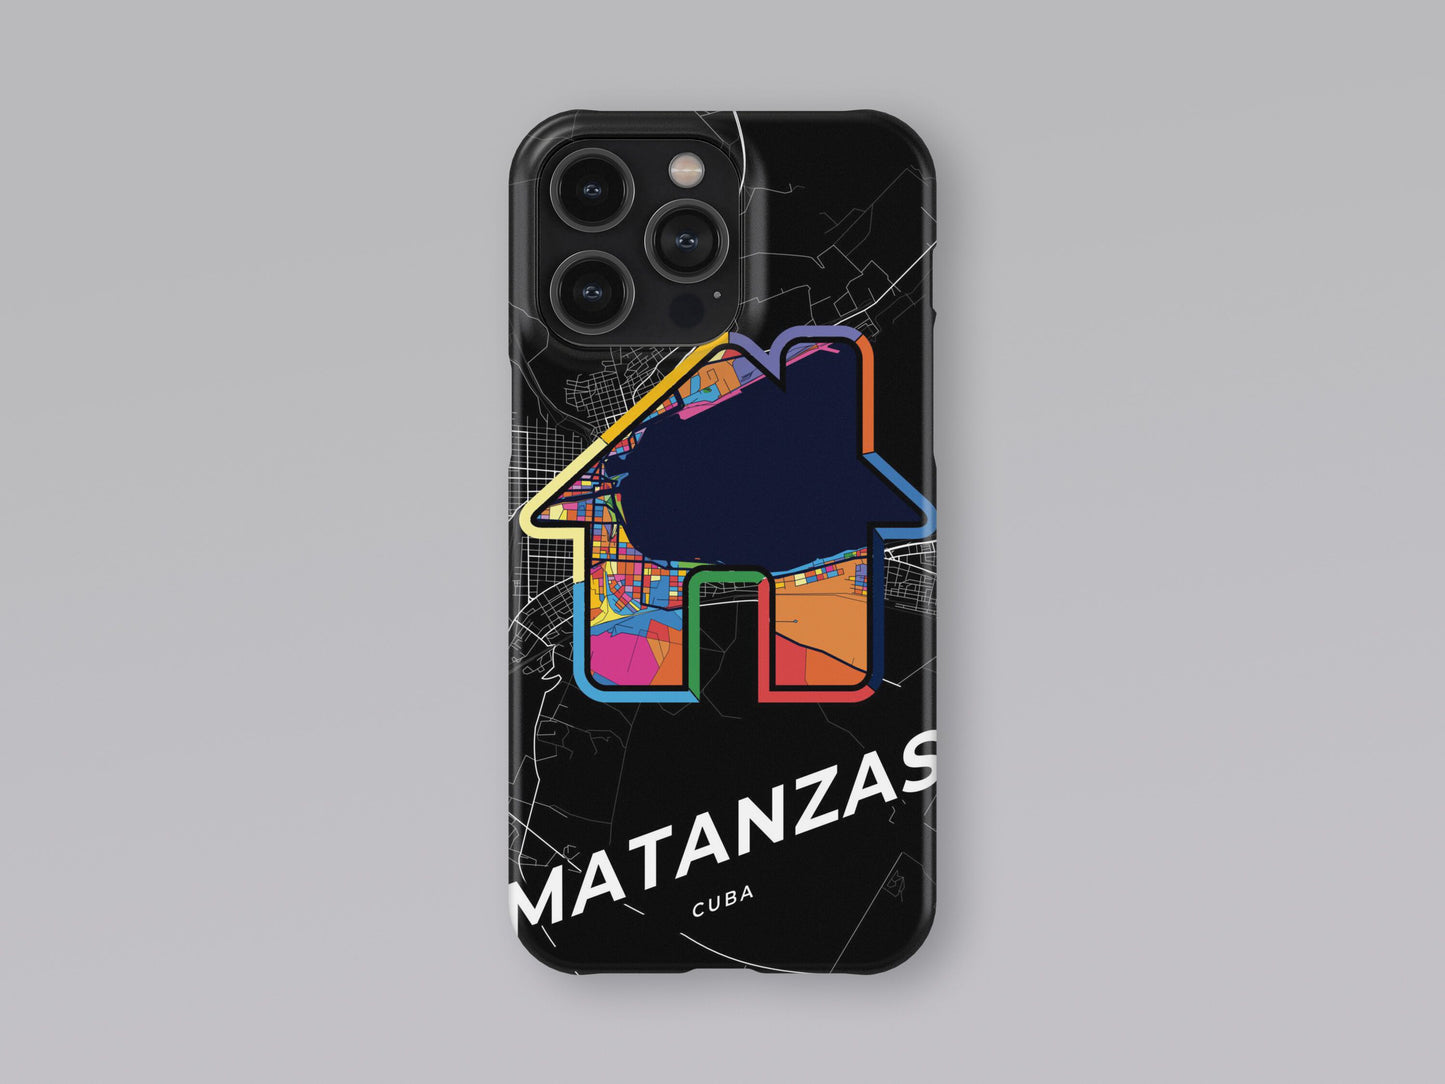 Matanzas Cuba slim phone case with colorful icon. Birthday, wedding or housewarming gift. Couple match cases. 3